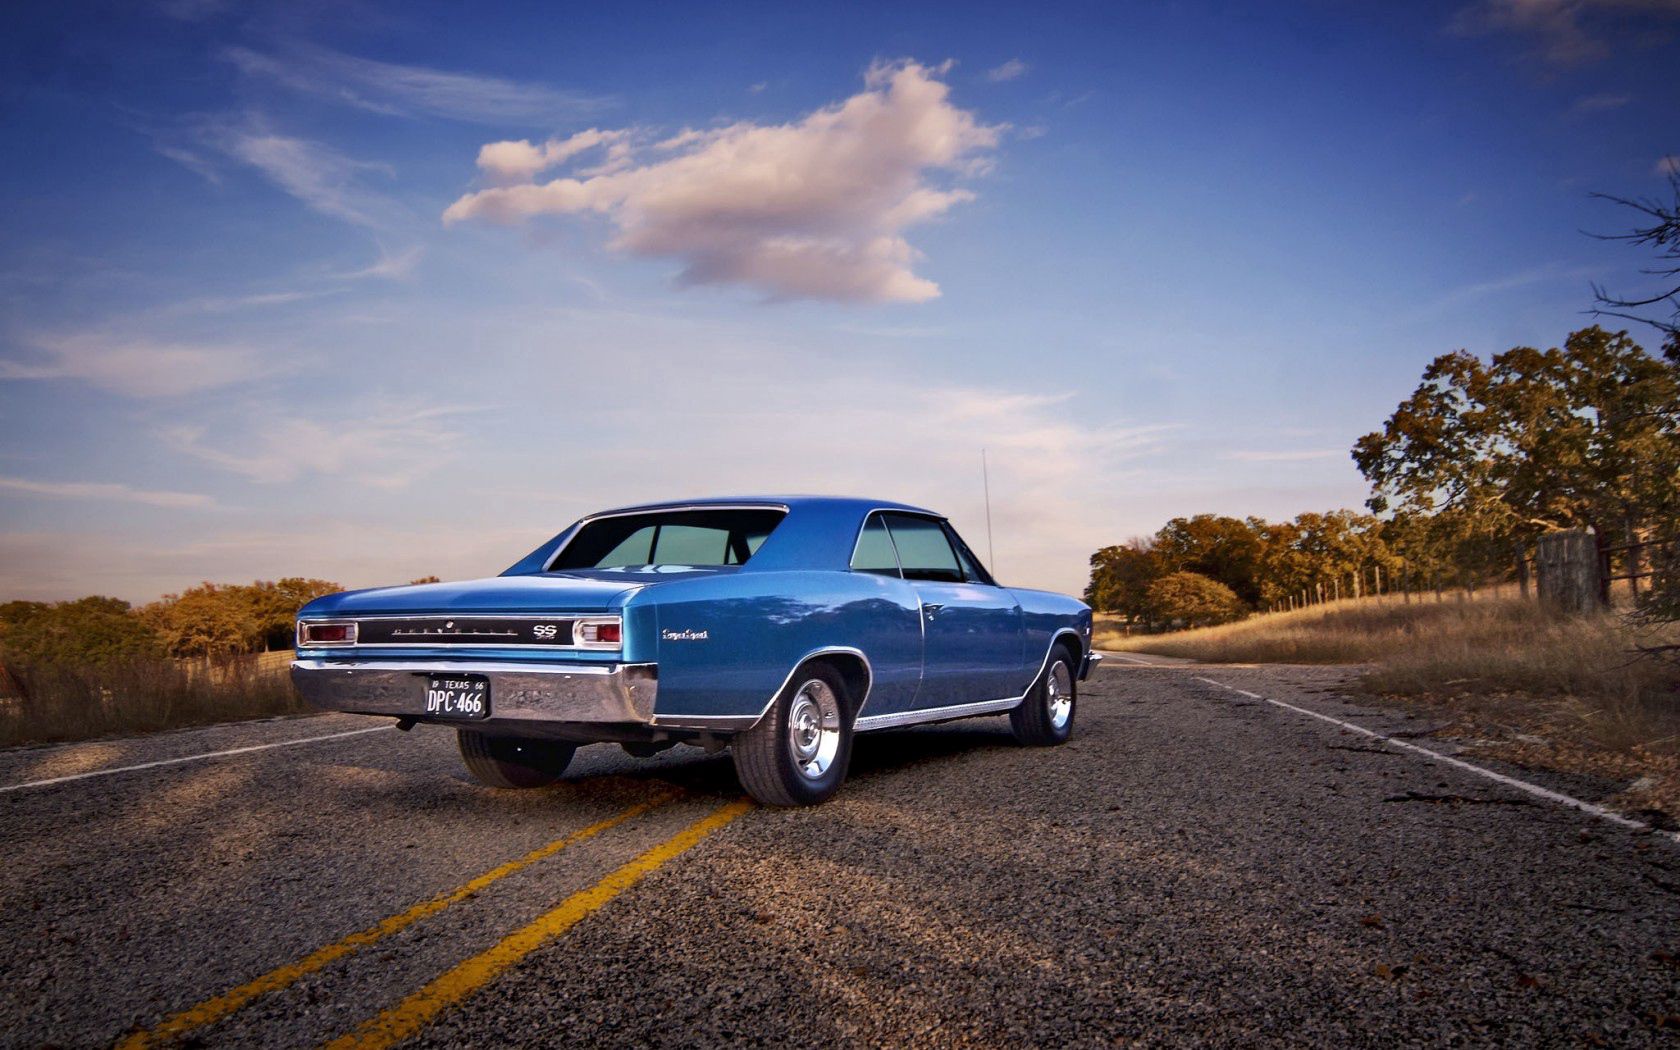 chevrolet, cars, back view, rear view, 1966, chevelle